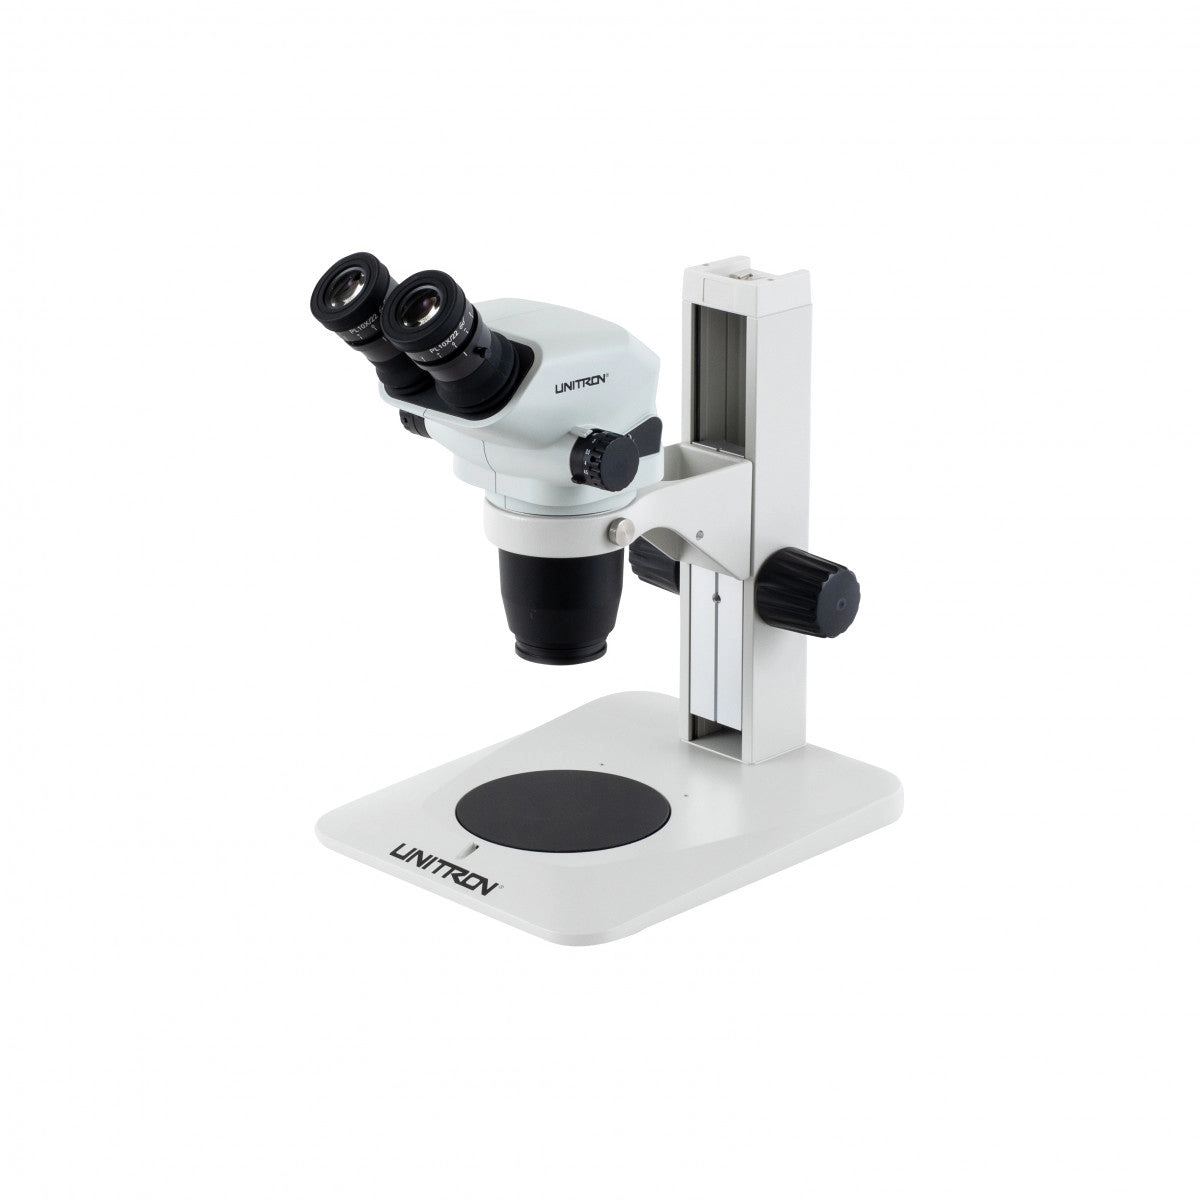 Unitron Z645 Zoom Stereo Microscope on Plain Focusing Stand